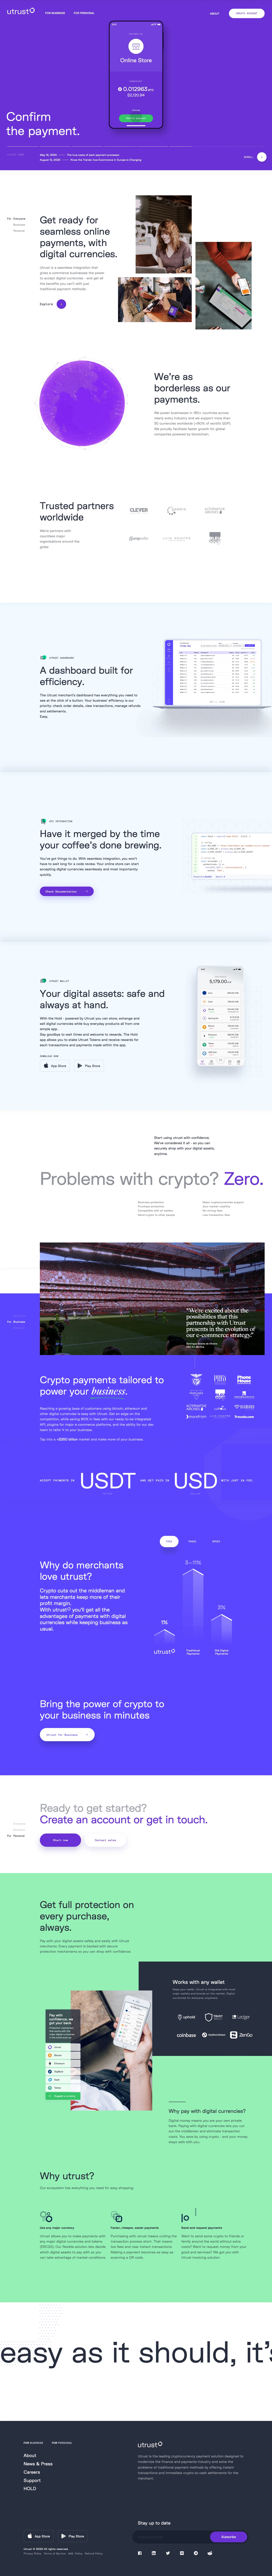 Utrust Landing Page Example: Utrust is a seamless integration that gives e-commerce businesses the power to accept digital currencies like bitcoin and ethereum, and get all the benefits you can’t with just traditional payment methods.